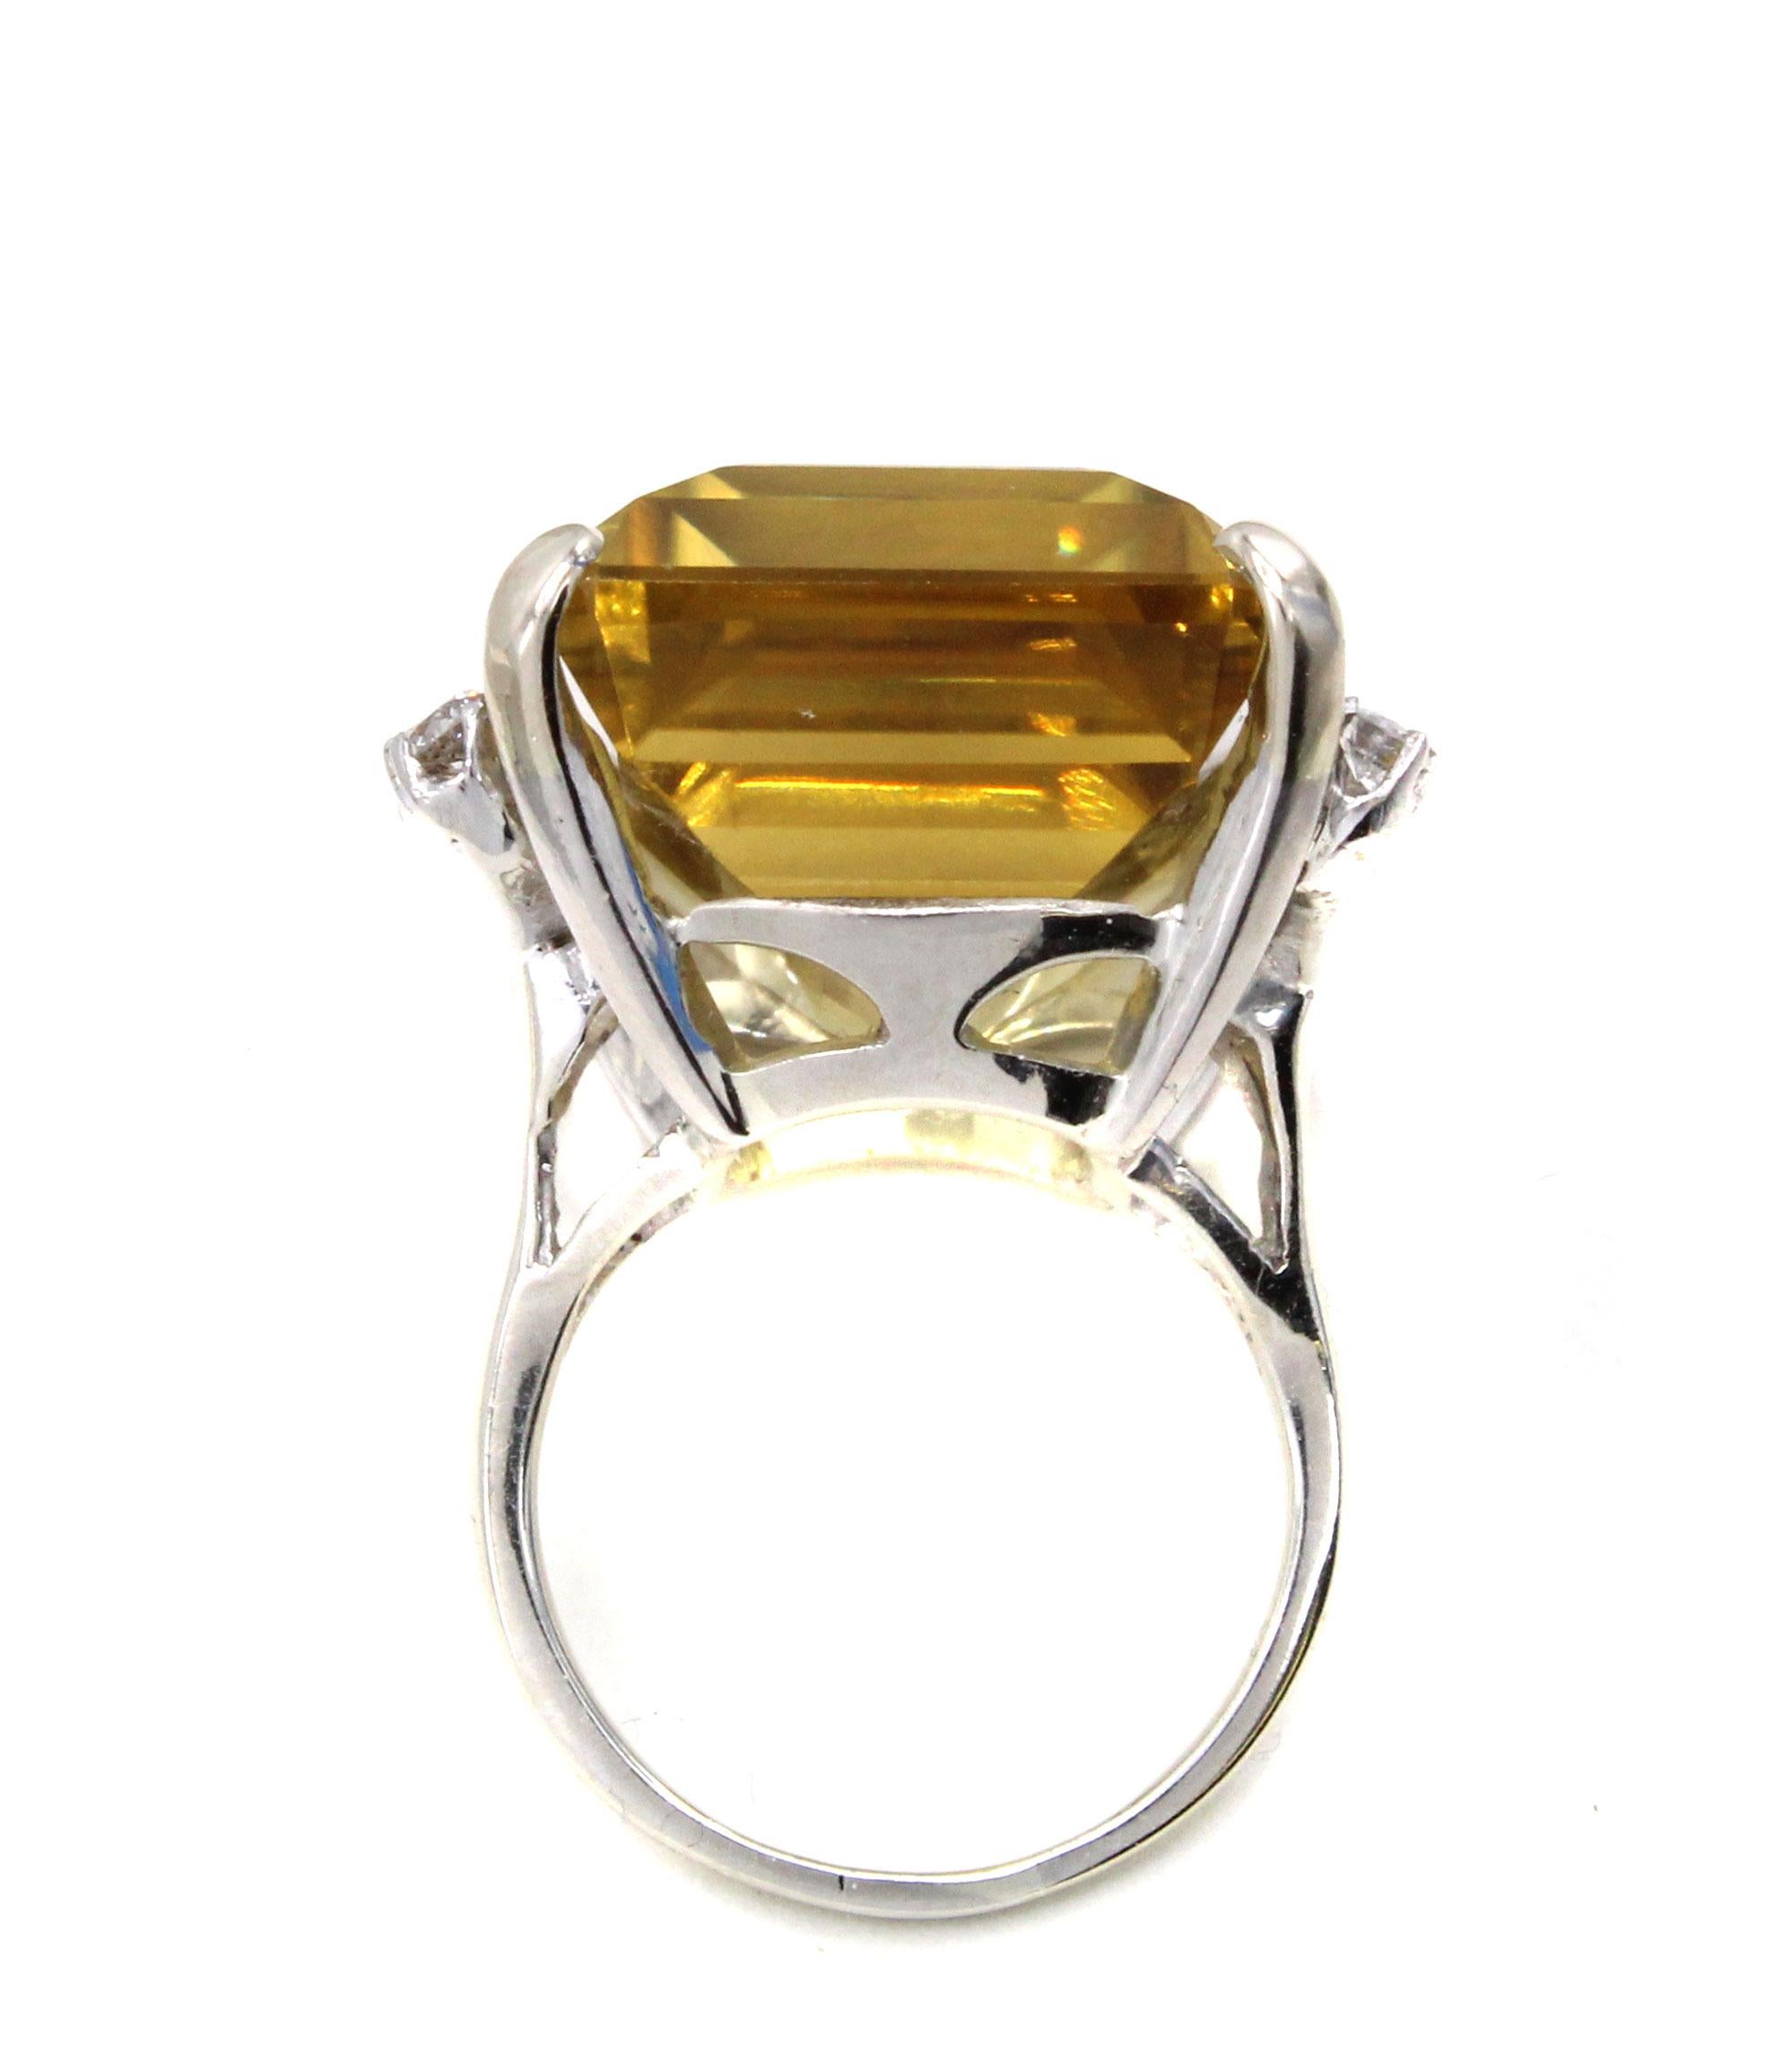 Centrally set with a Golden Citrine measured to weigh approximately 35 carats this bold 1960s ring is a real eye-catcher. The perfectly cut emerald cut Citrine exhibits a beautiful saturation of color and fire. 6 bright white round brilliant cut